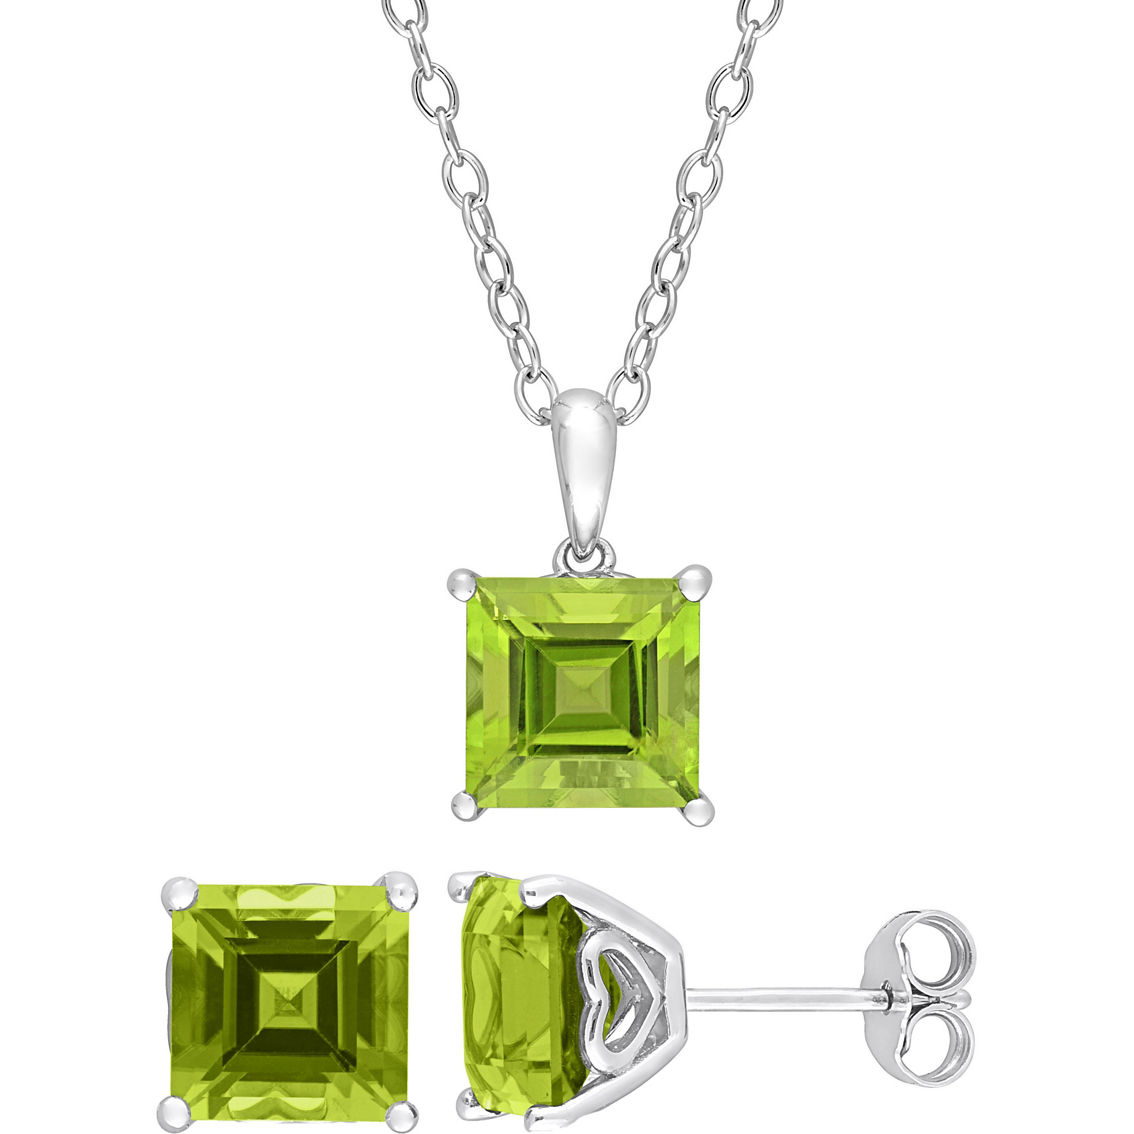 Sofia B. 2pc Set Princess Cut Peridot Solitaire Necklace & Earrings Sterling Silver